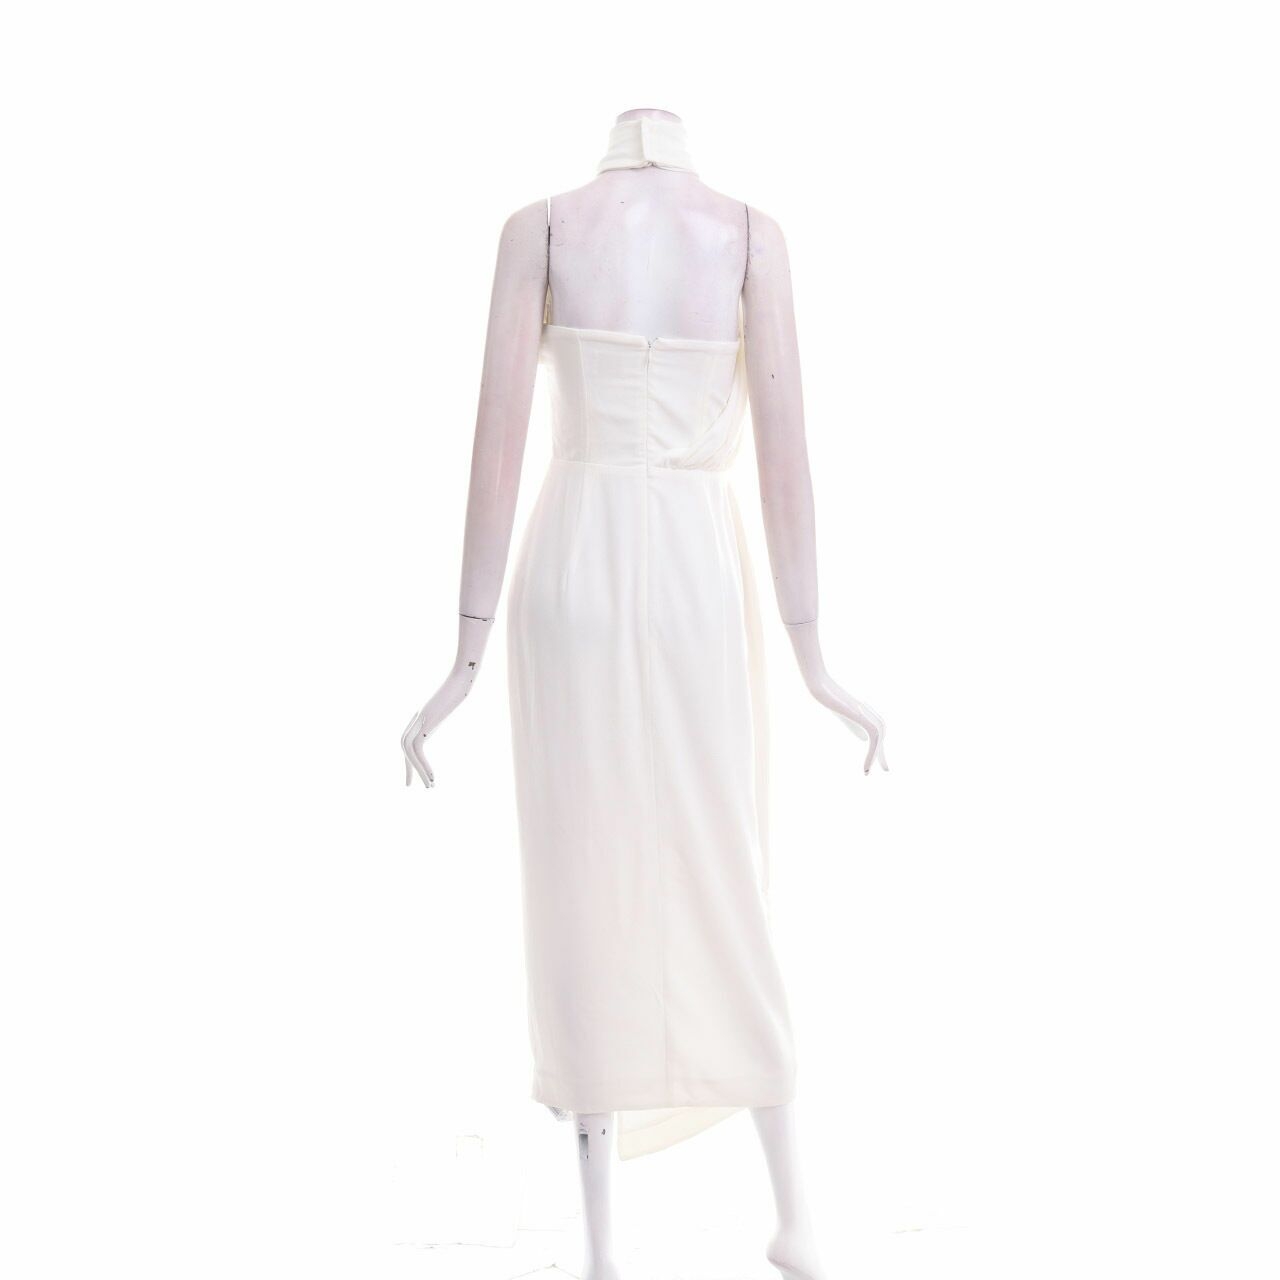 Misha Collection White Long Dress